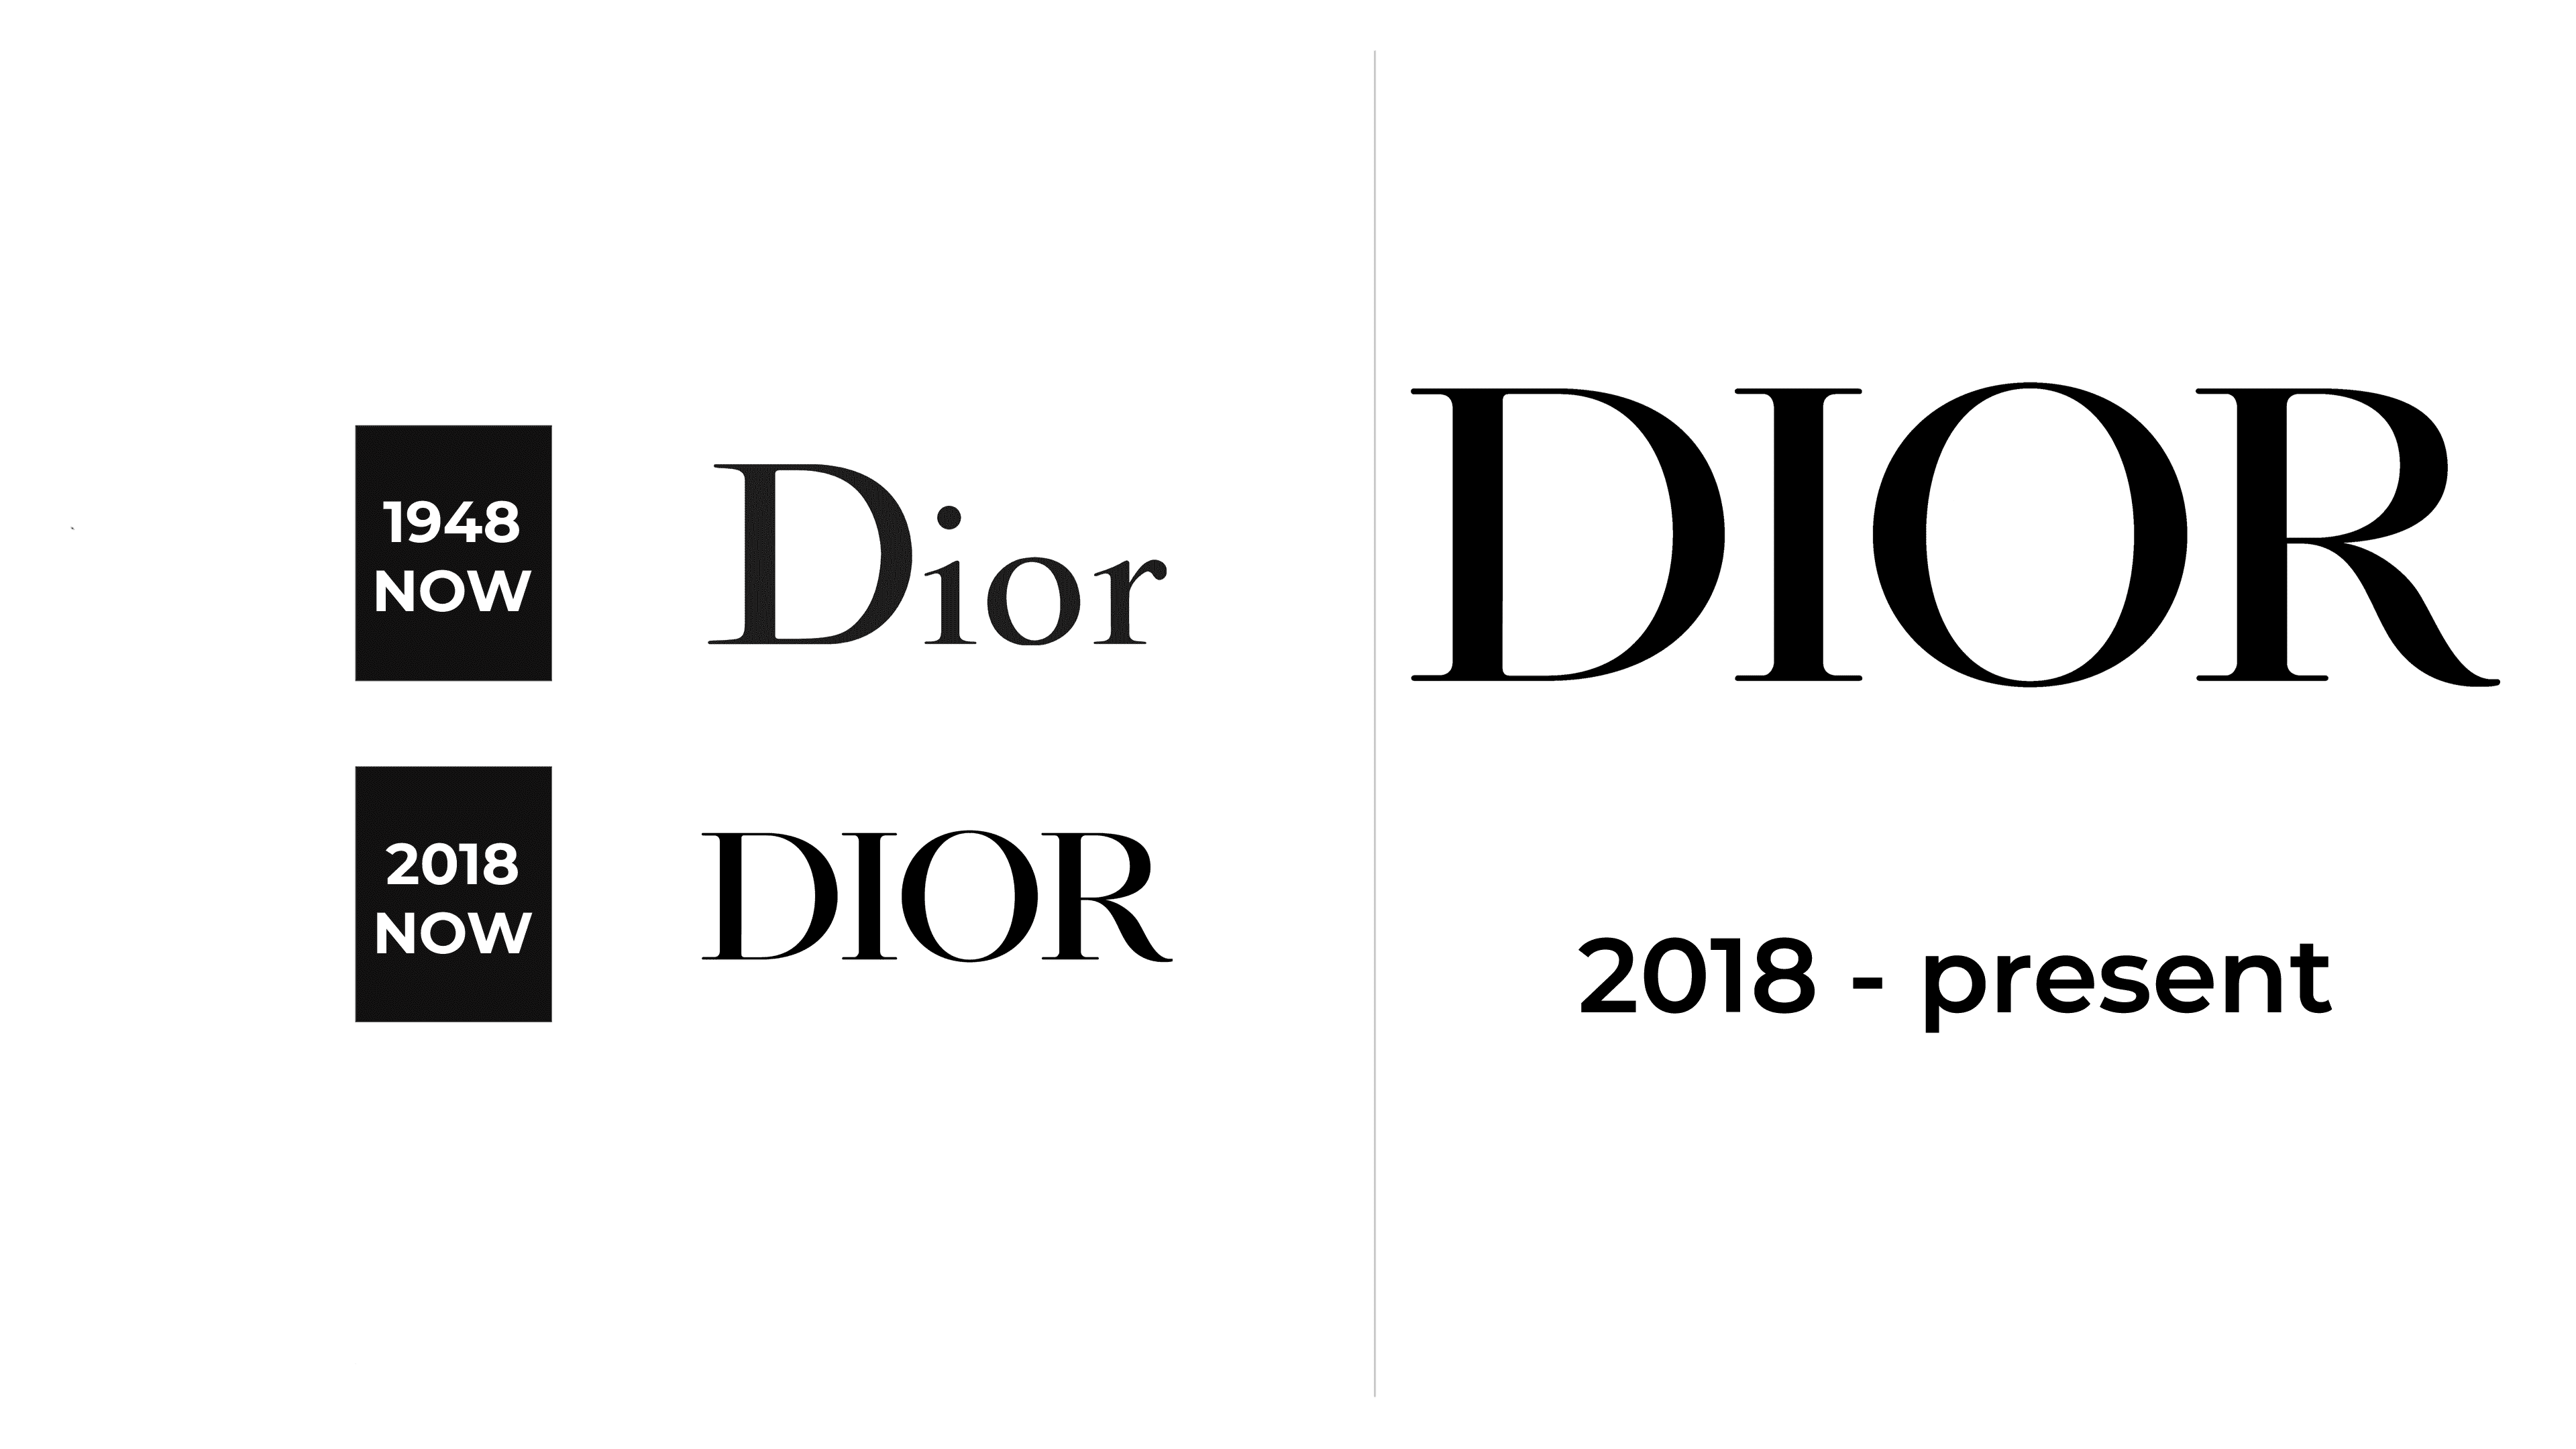 Christian Dior Logo and symbol, meaning, history, PNG, brand